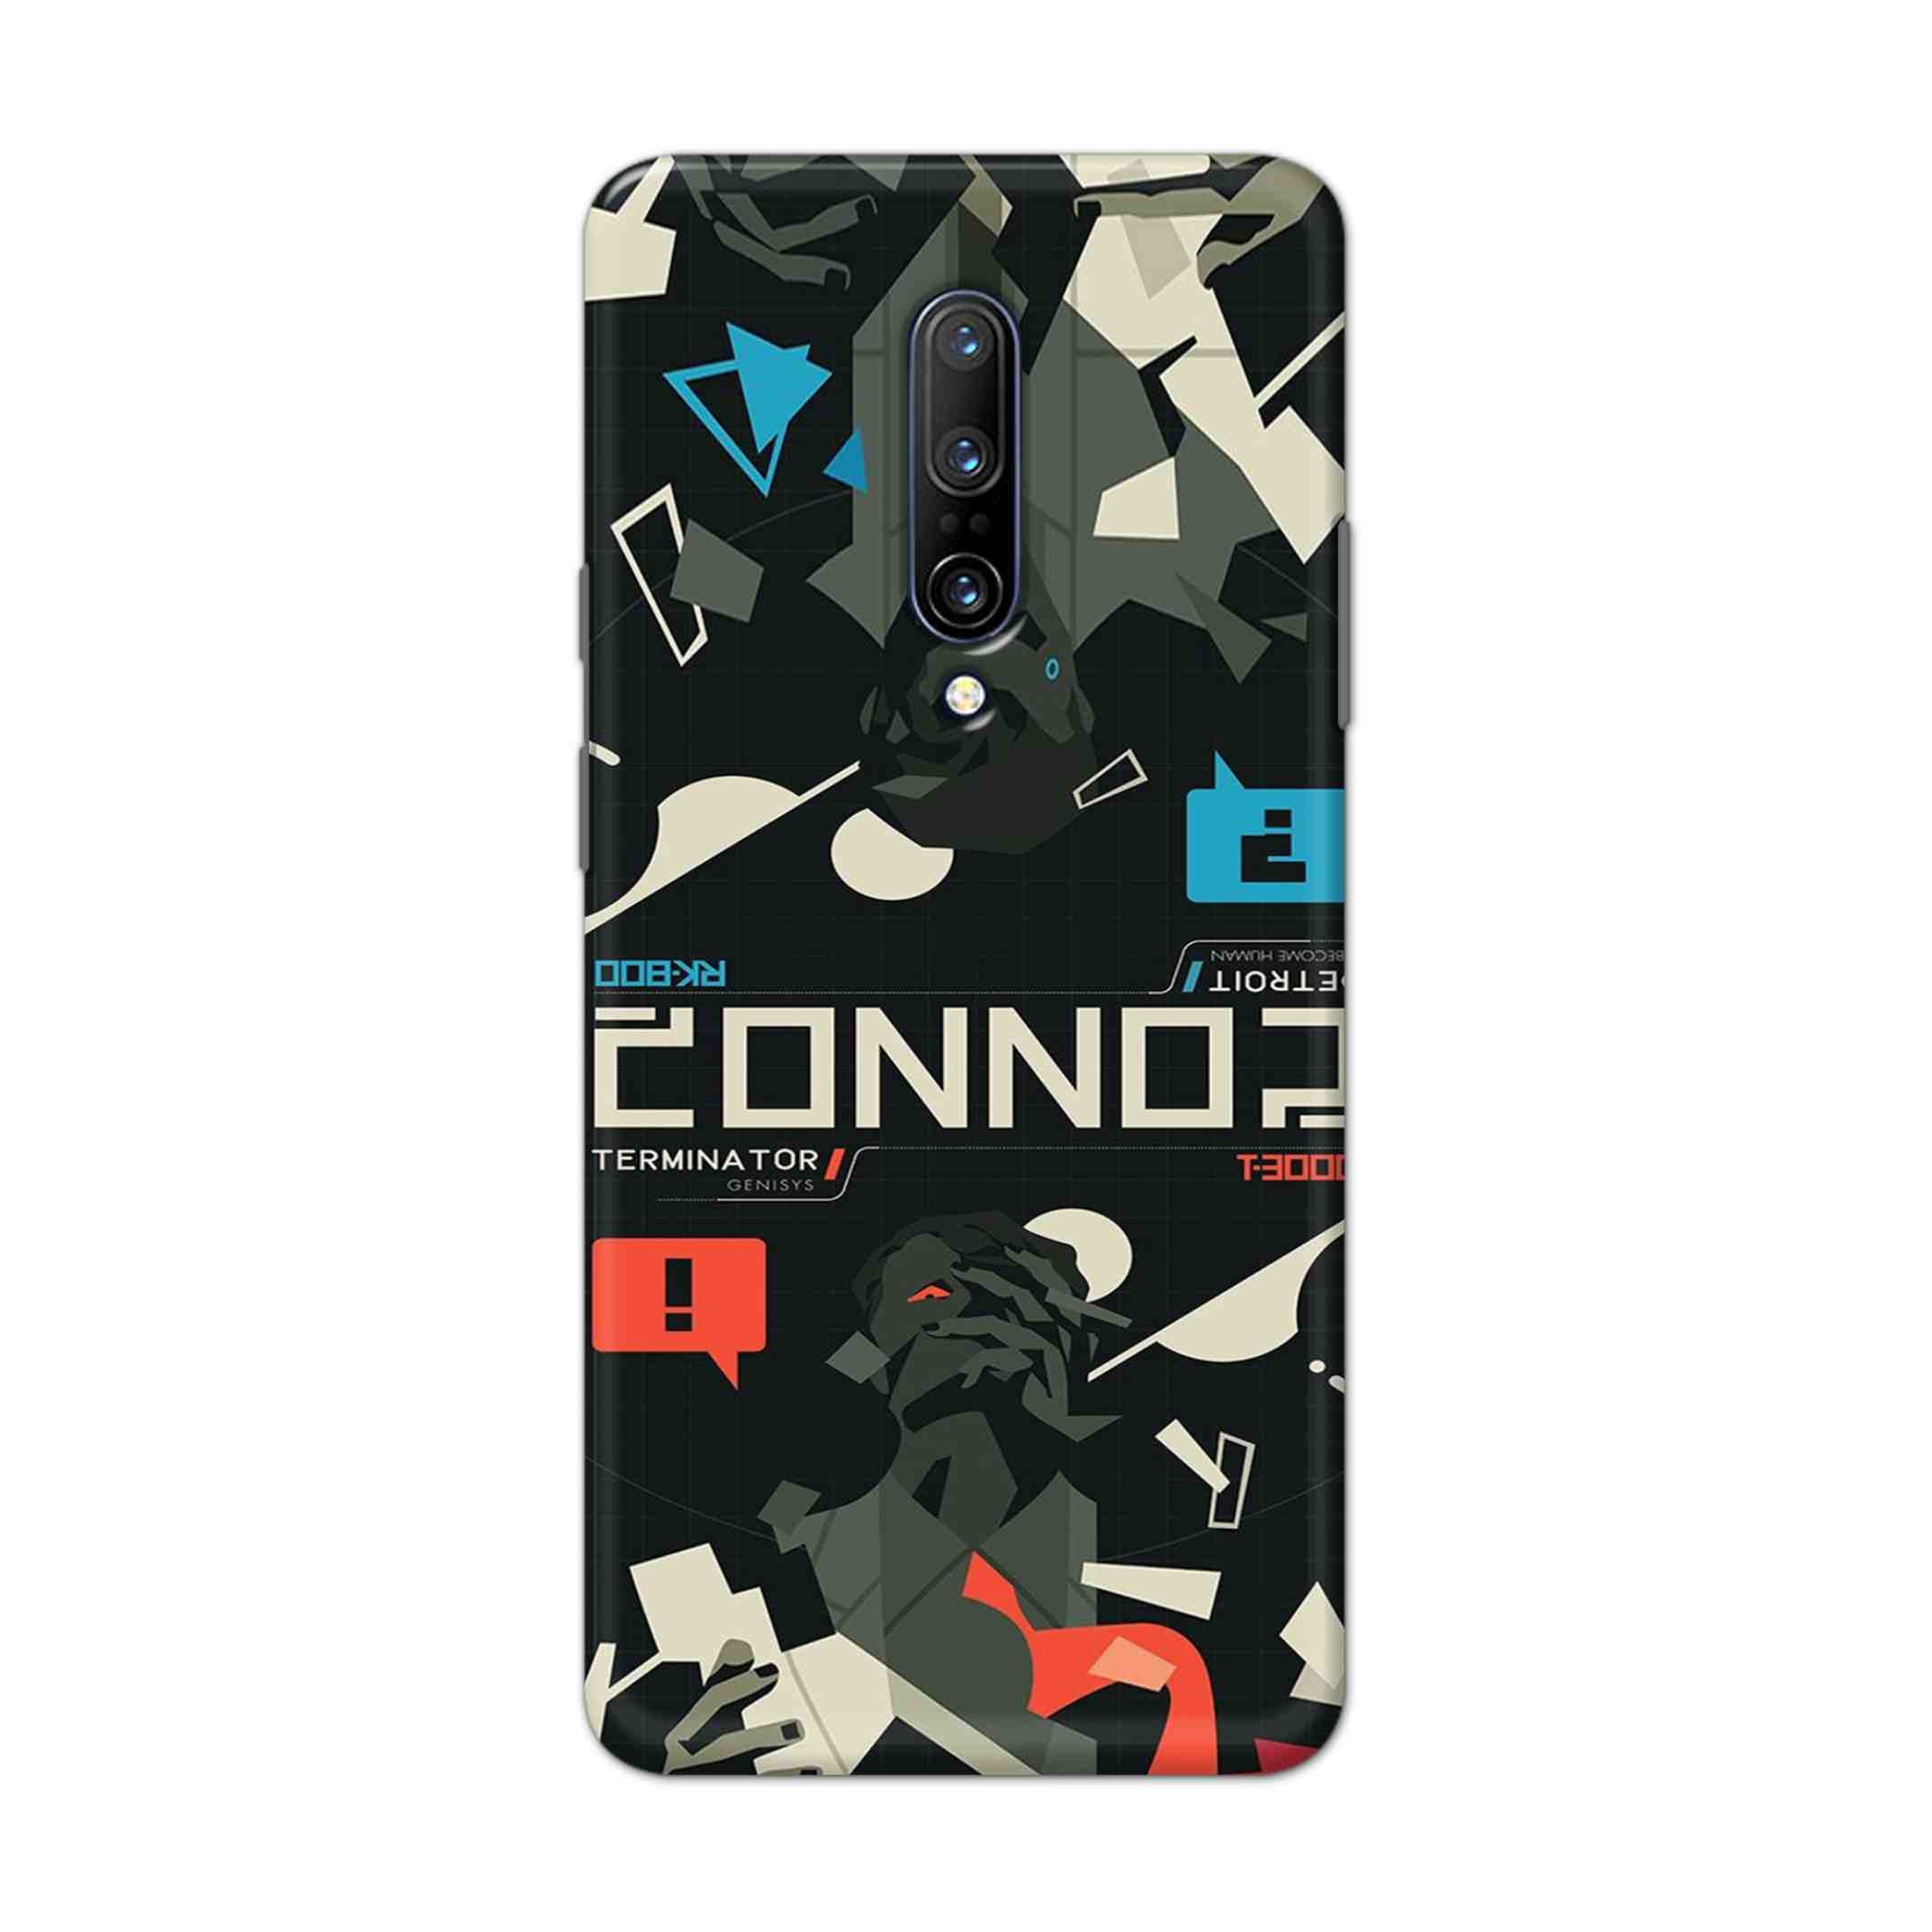 Buy Terminator Hard Back Mobile Phone Case Cover For OnePlus 7 Pro Online